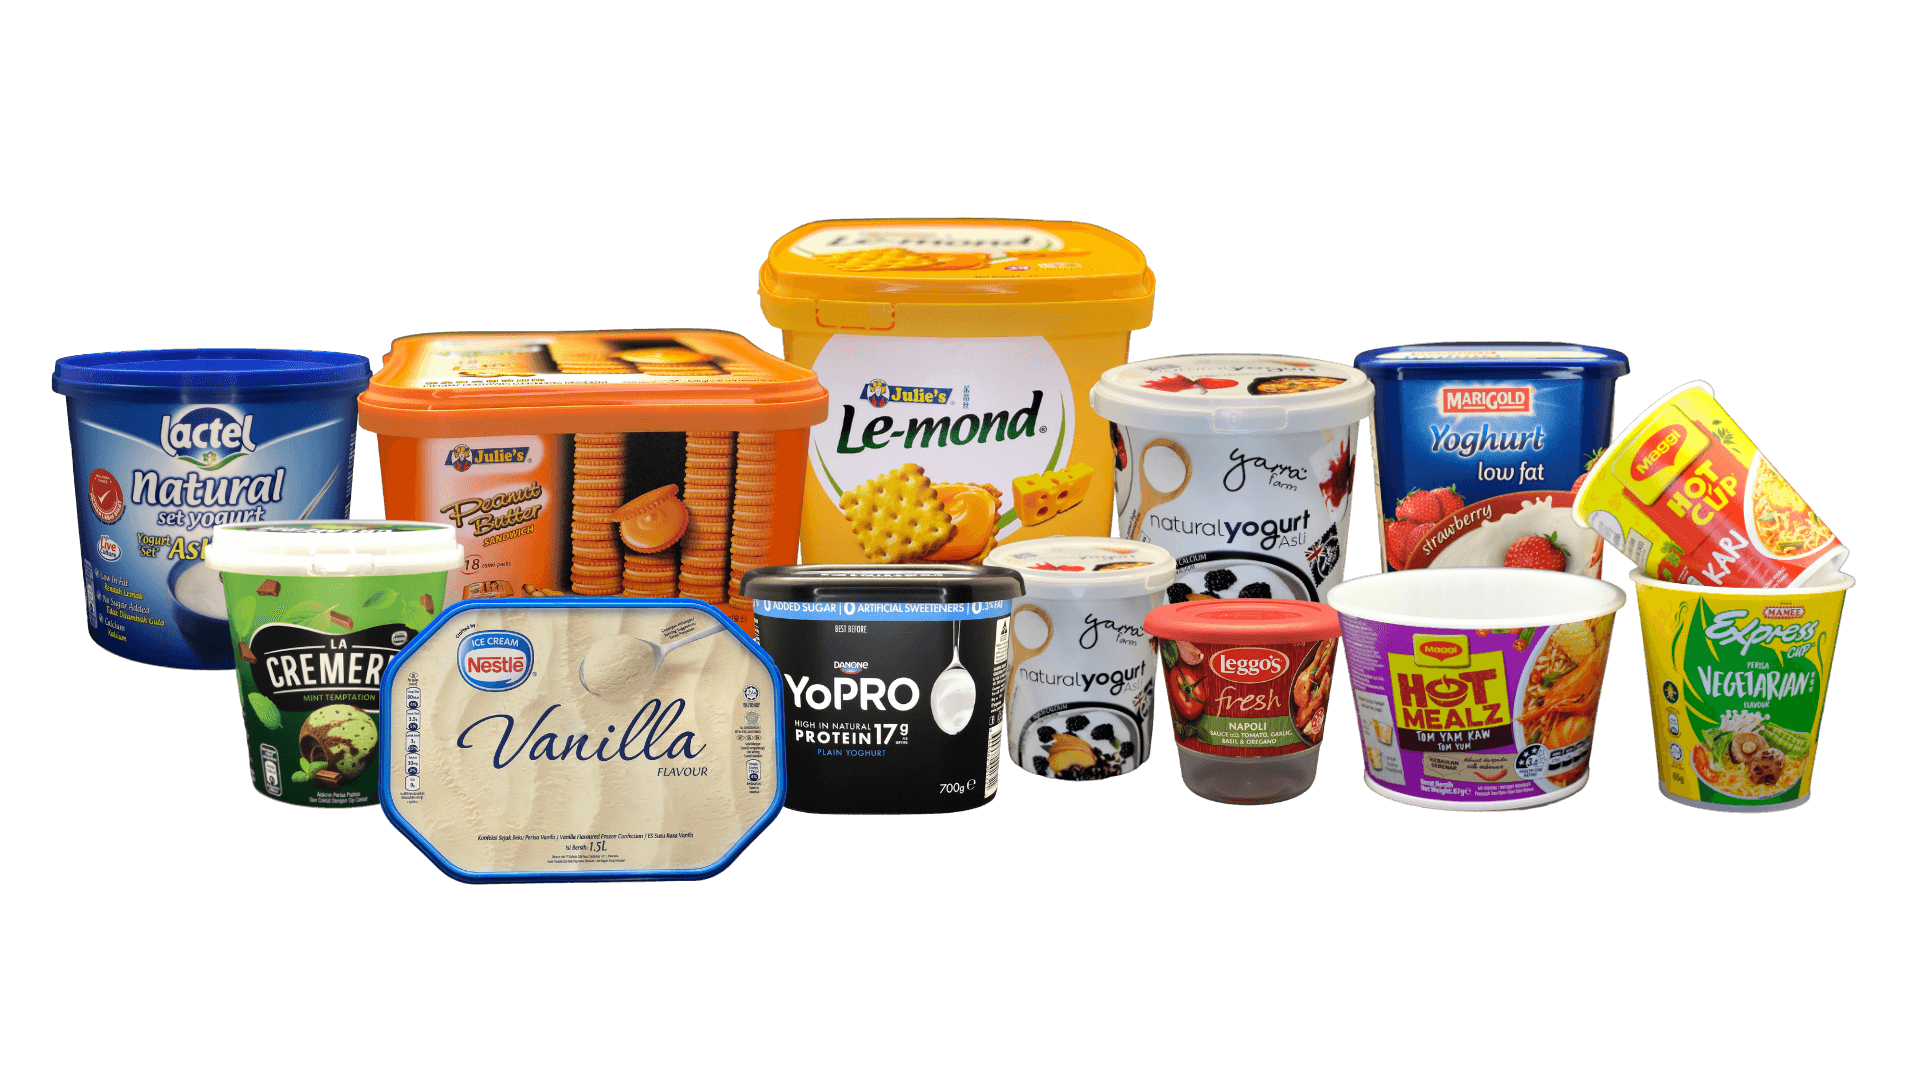 Plastic Food Packaging Supplier in Singapore​